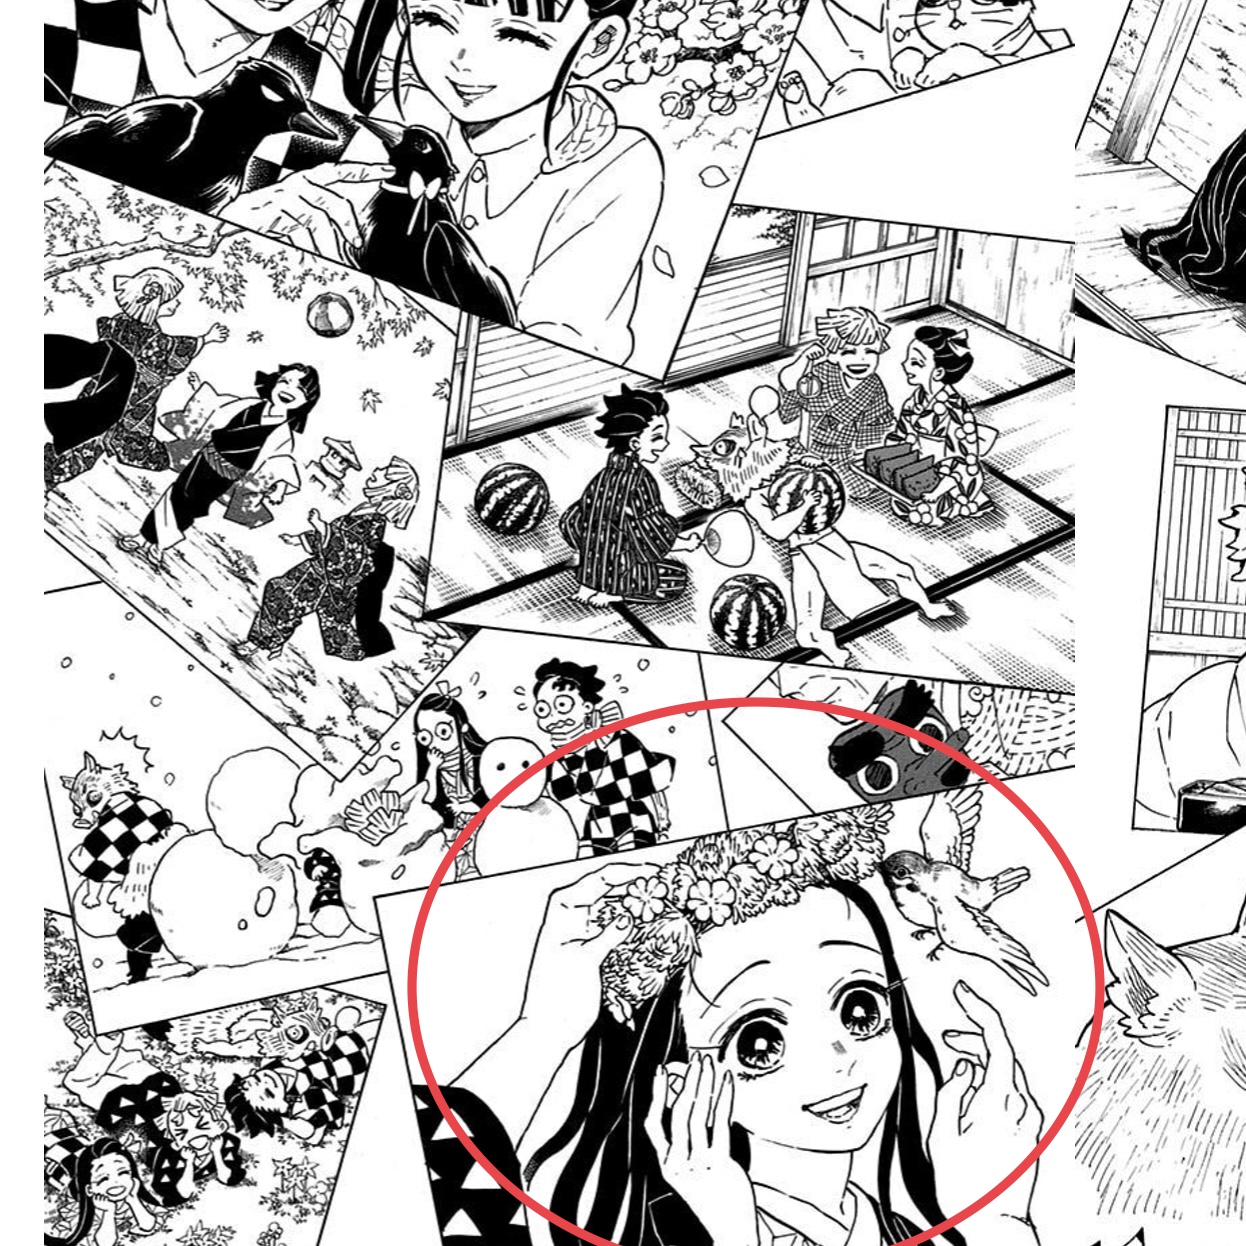 Kyle Anime Scouter Look At Nezuko In Memory Photos This Is Same As Zenitsu S Dream In Infinity Train Zenitsu Is Giving Her A Ring Of Flowers His Happy Dream Has